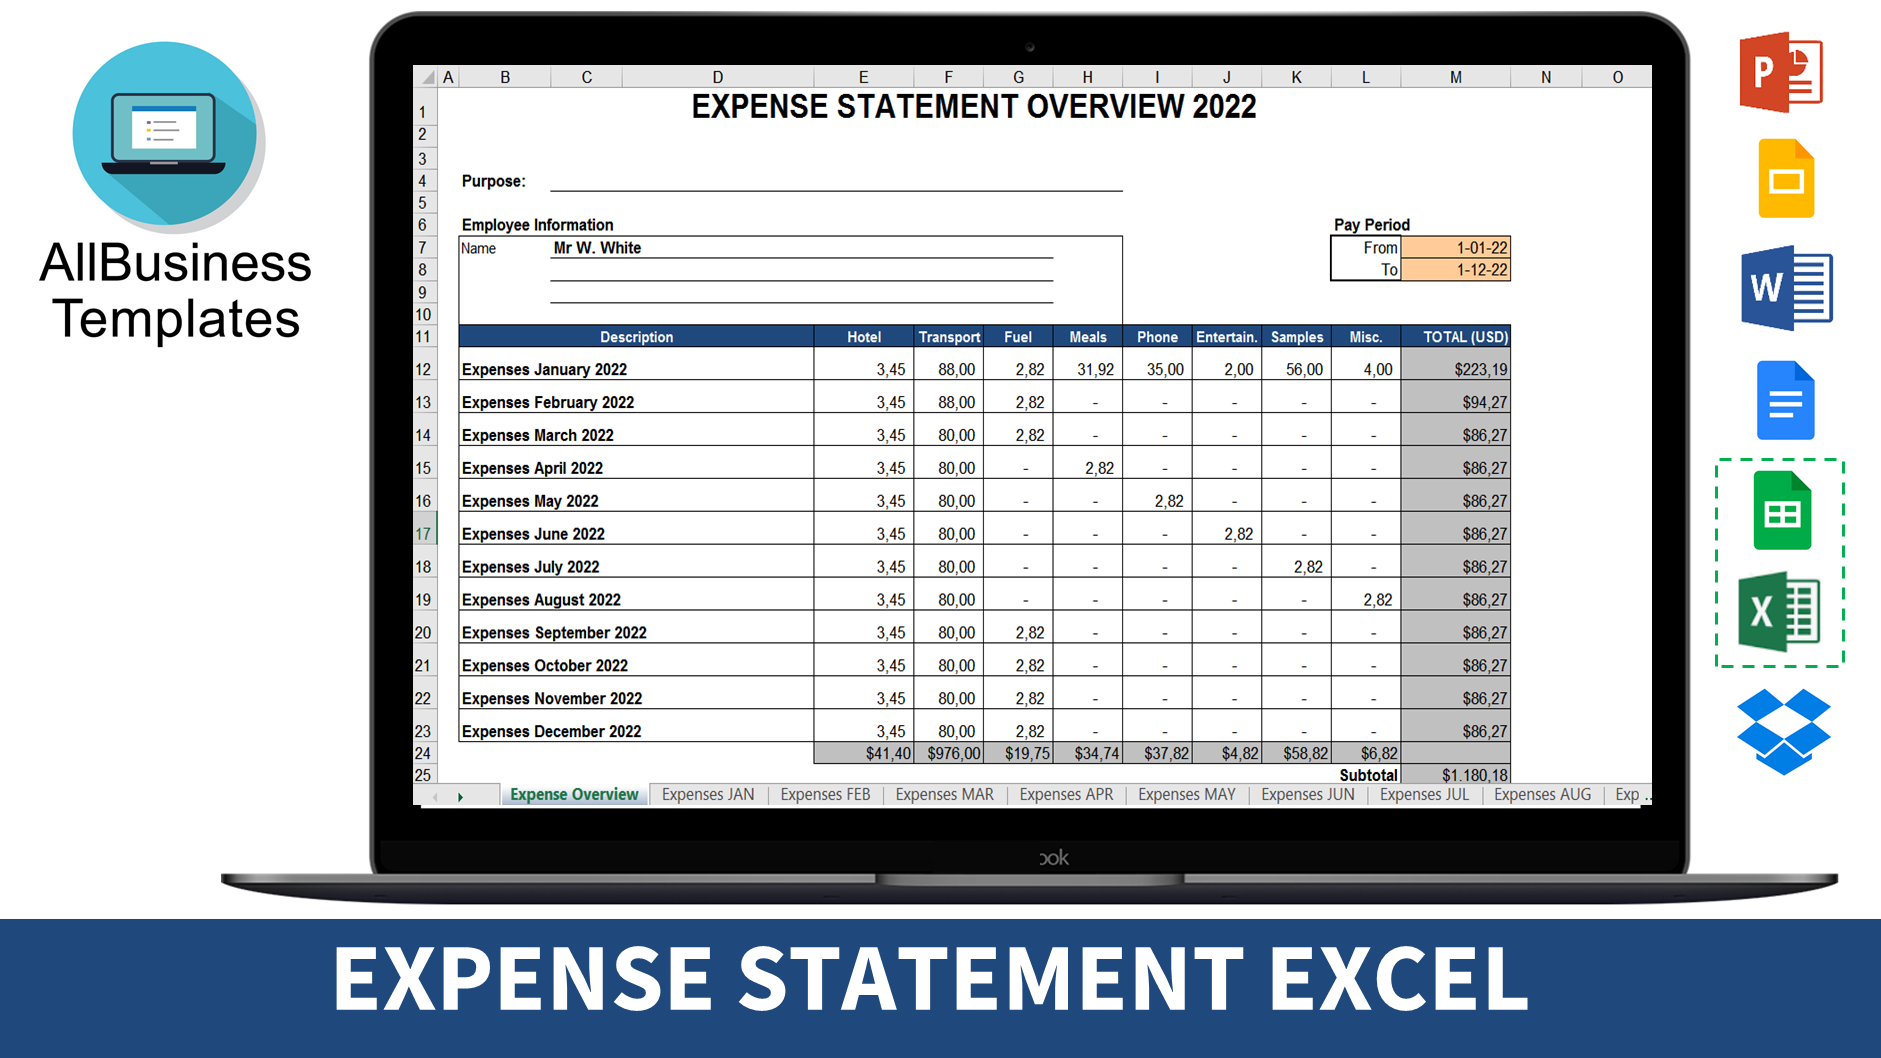 Business Expense Statement 2022 main image